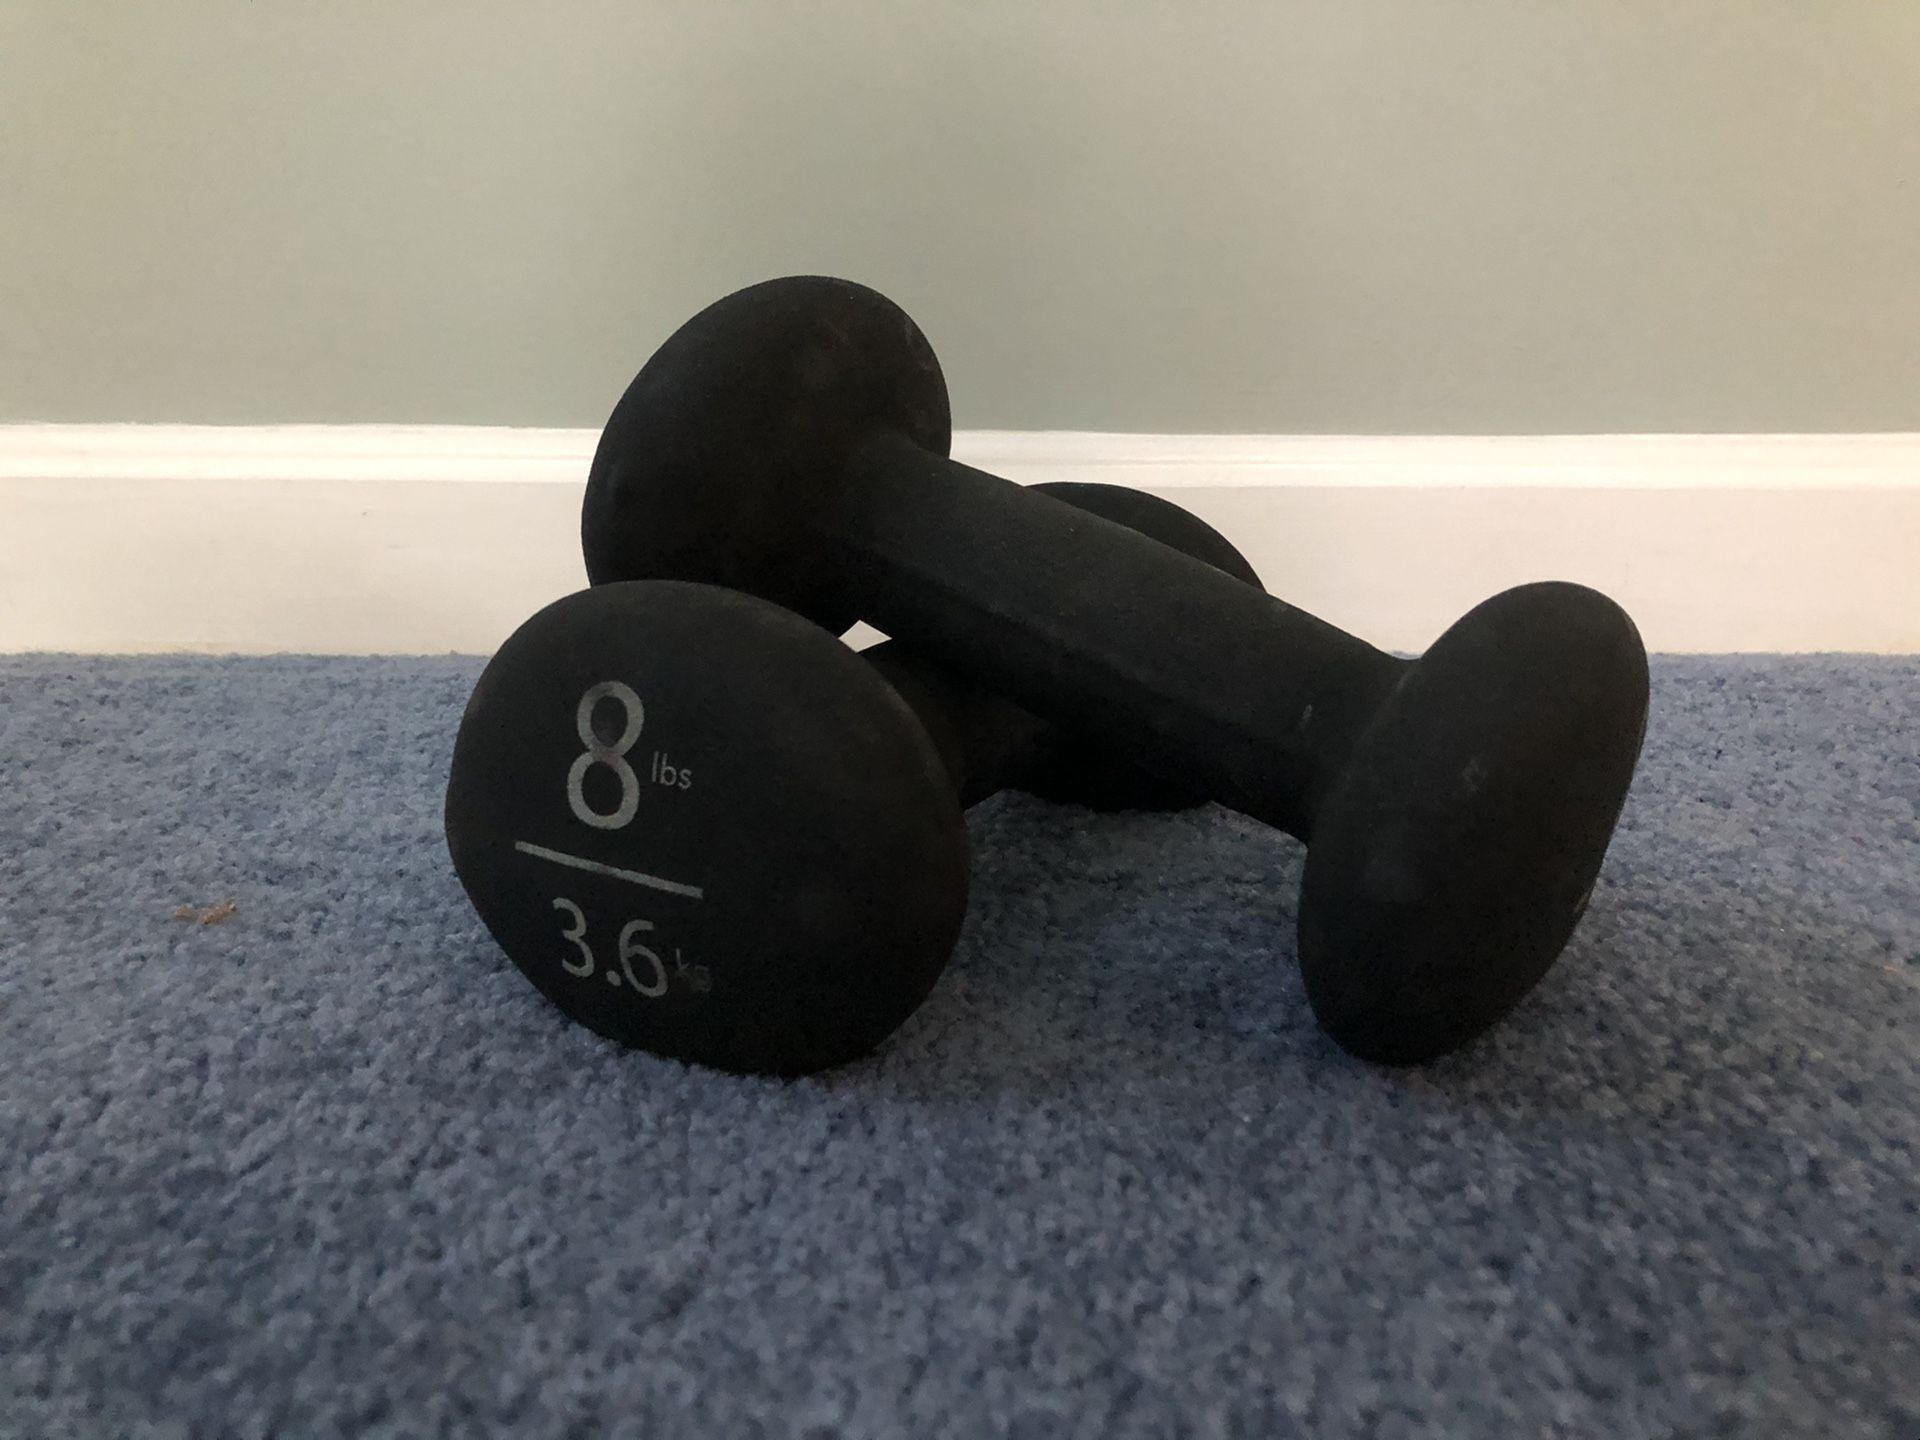 8lb Dumbbell (come in pairs)